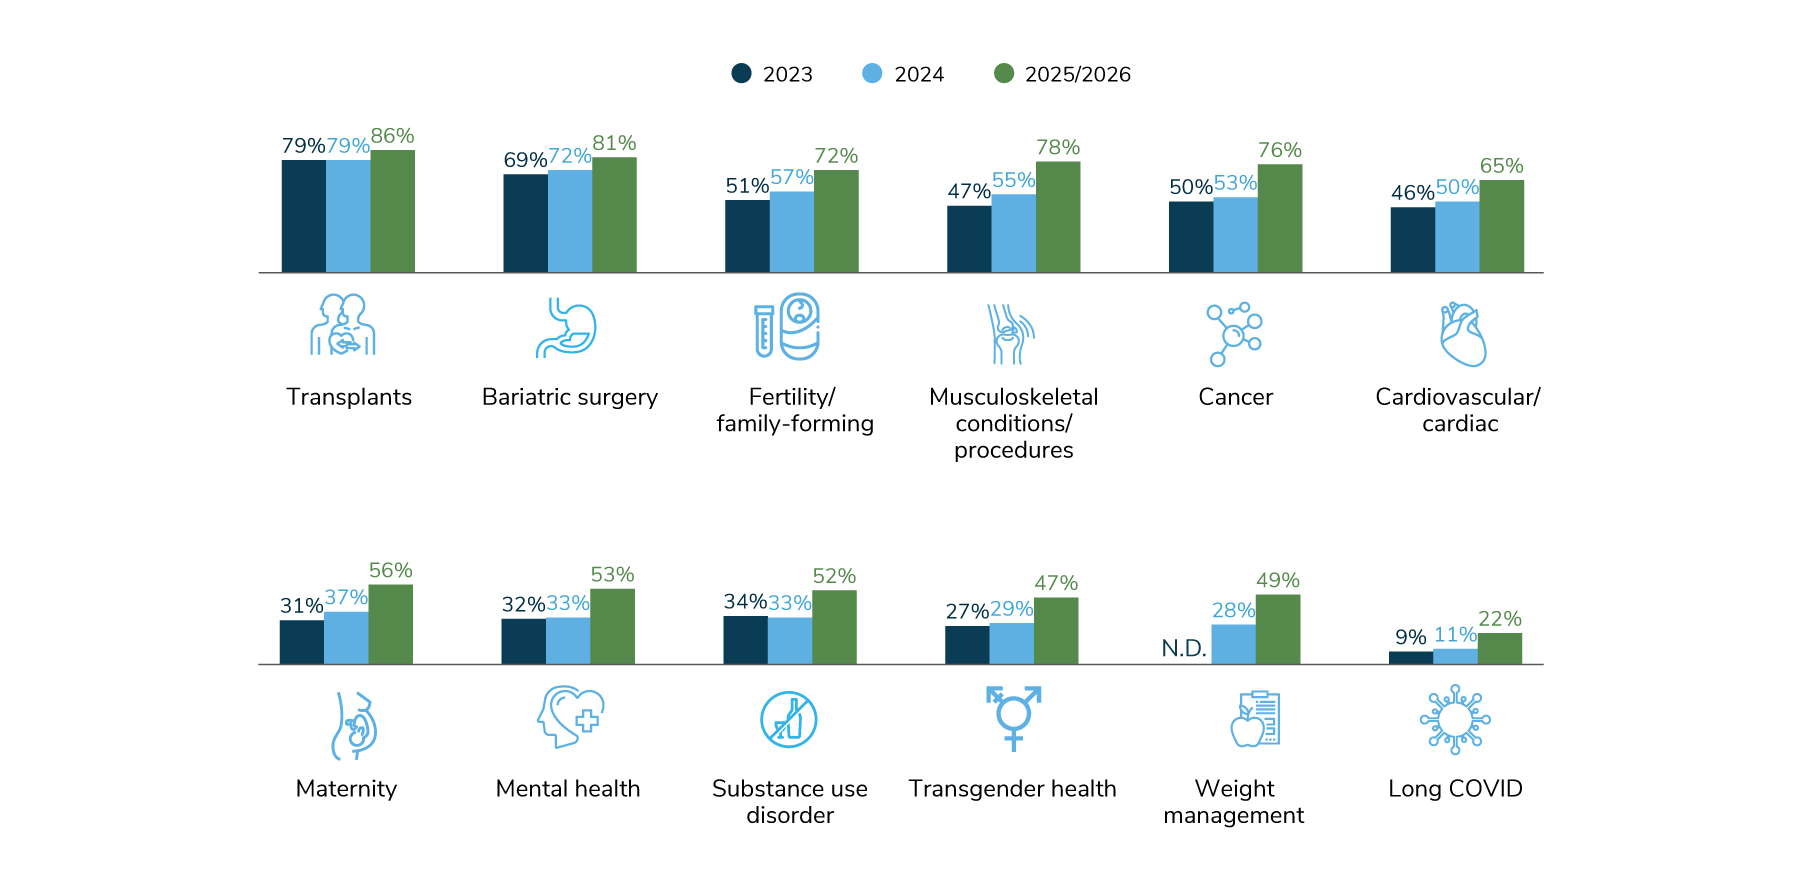 In 2024, employers will have in place COEs for numerous conditions, including: transplants (79%); bariatric surgery (72%); fertility/family-forming (57%); musculoskeletal conditions (55%); cancer (53%); cardiovascular/cardiac (50%); maternity (37%); mental health (33%); substance use disorder (33%); transgender health (29%); weight management (28%); and long COVID.
